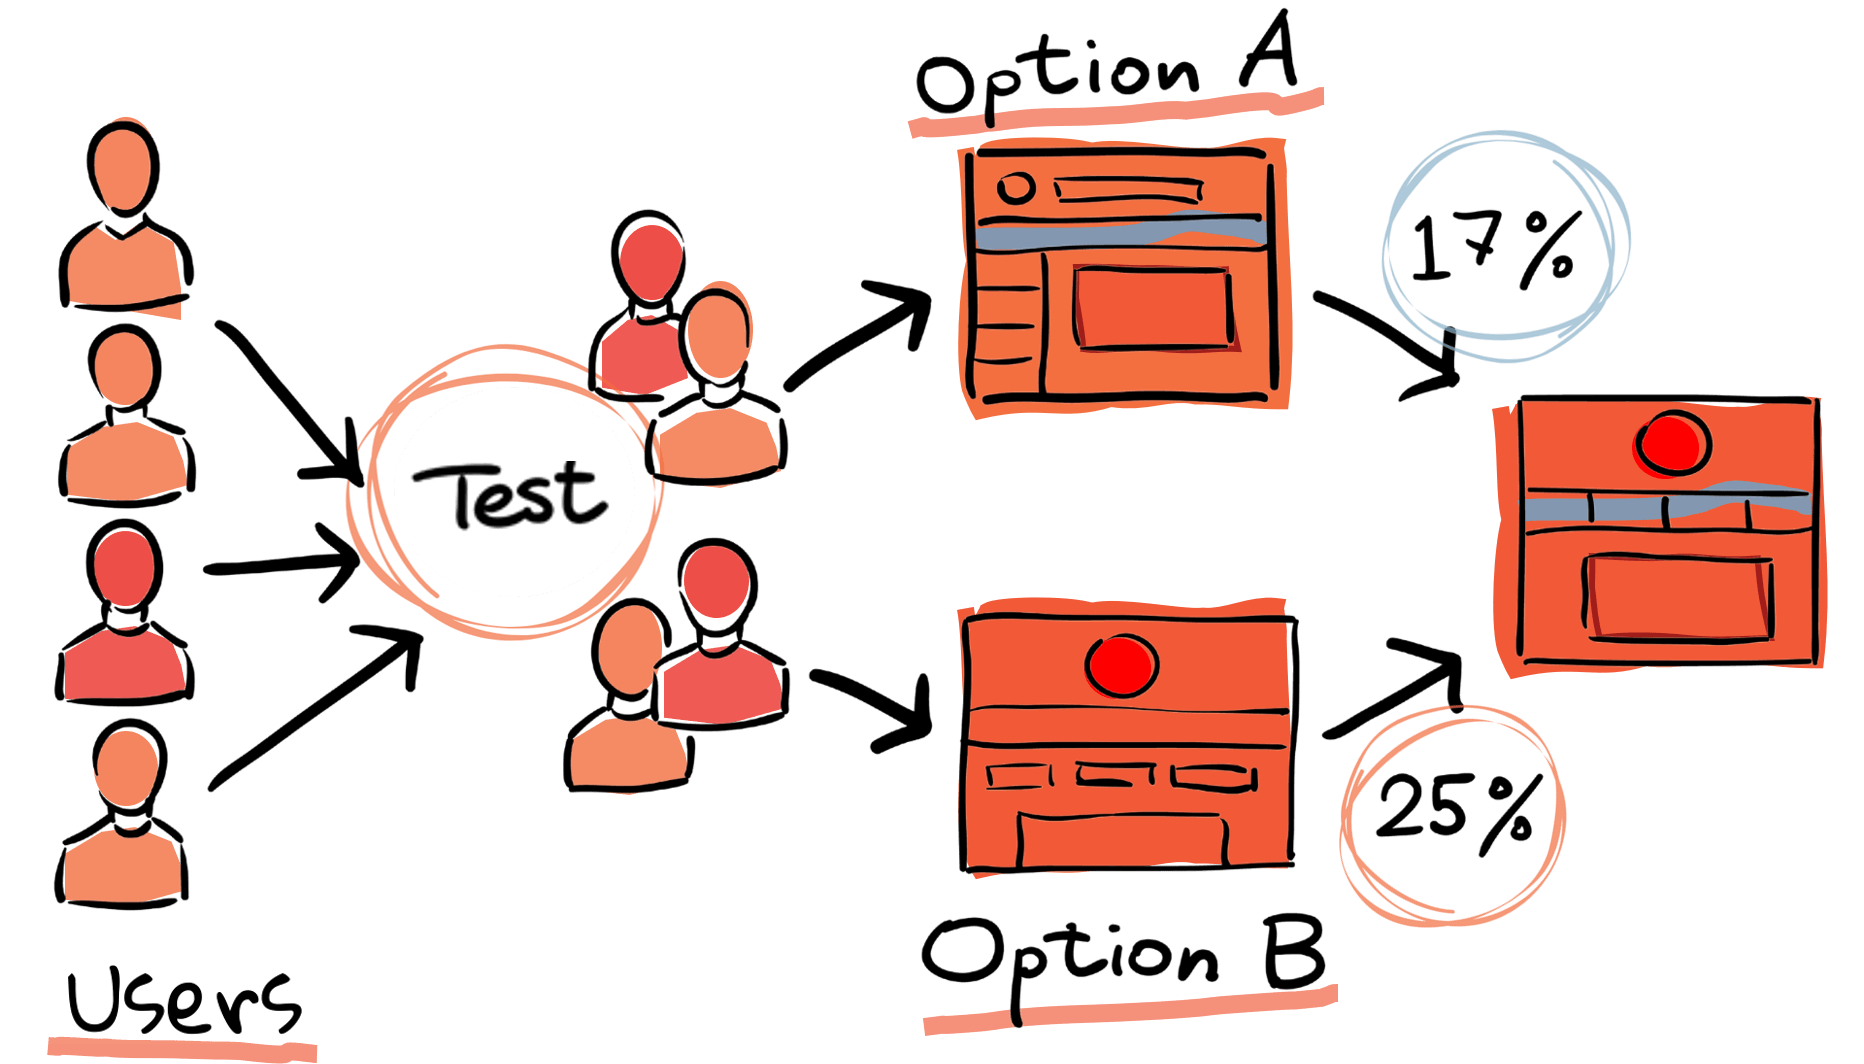 Hand drawn diagram of a hypothetical test, showing users going into the test enviroment, being directed to either Option A or B, and then the results.